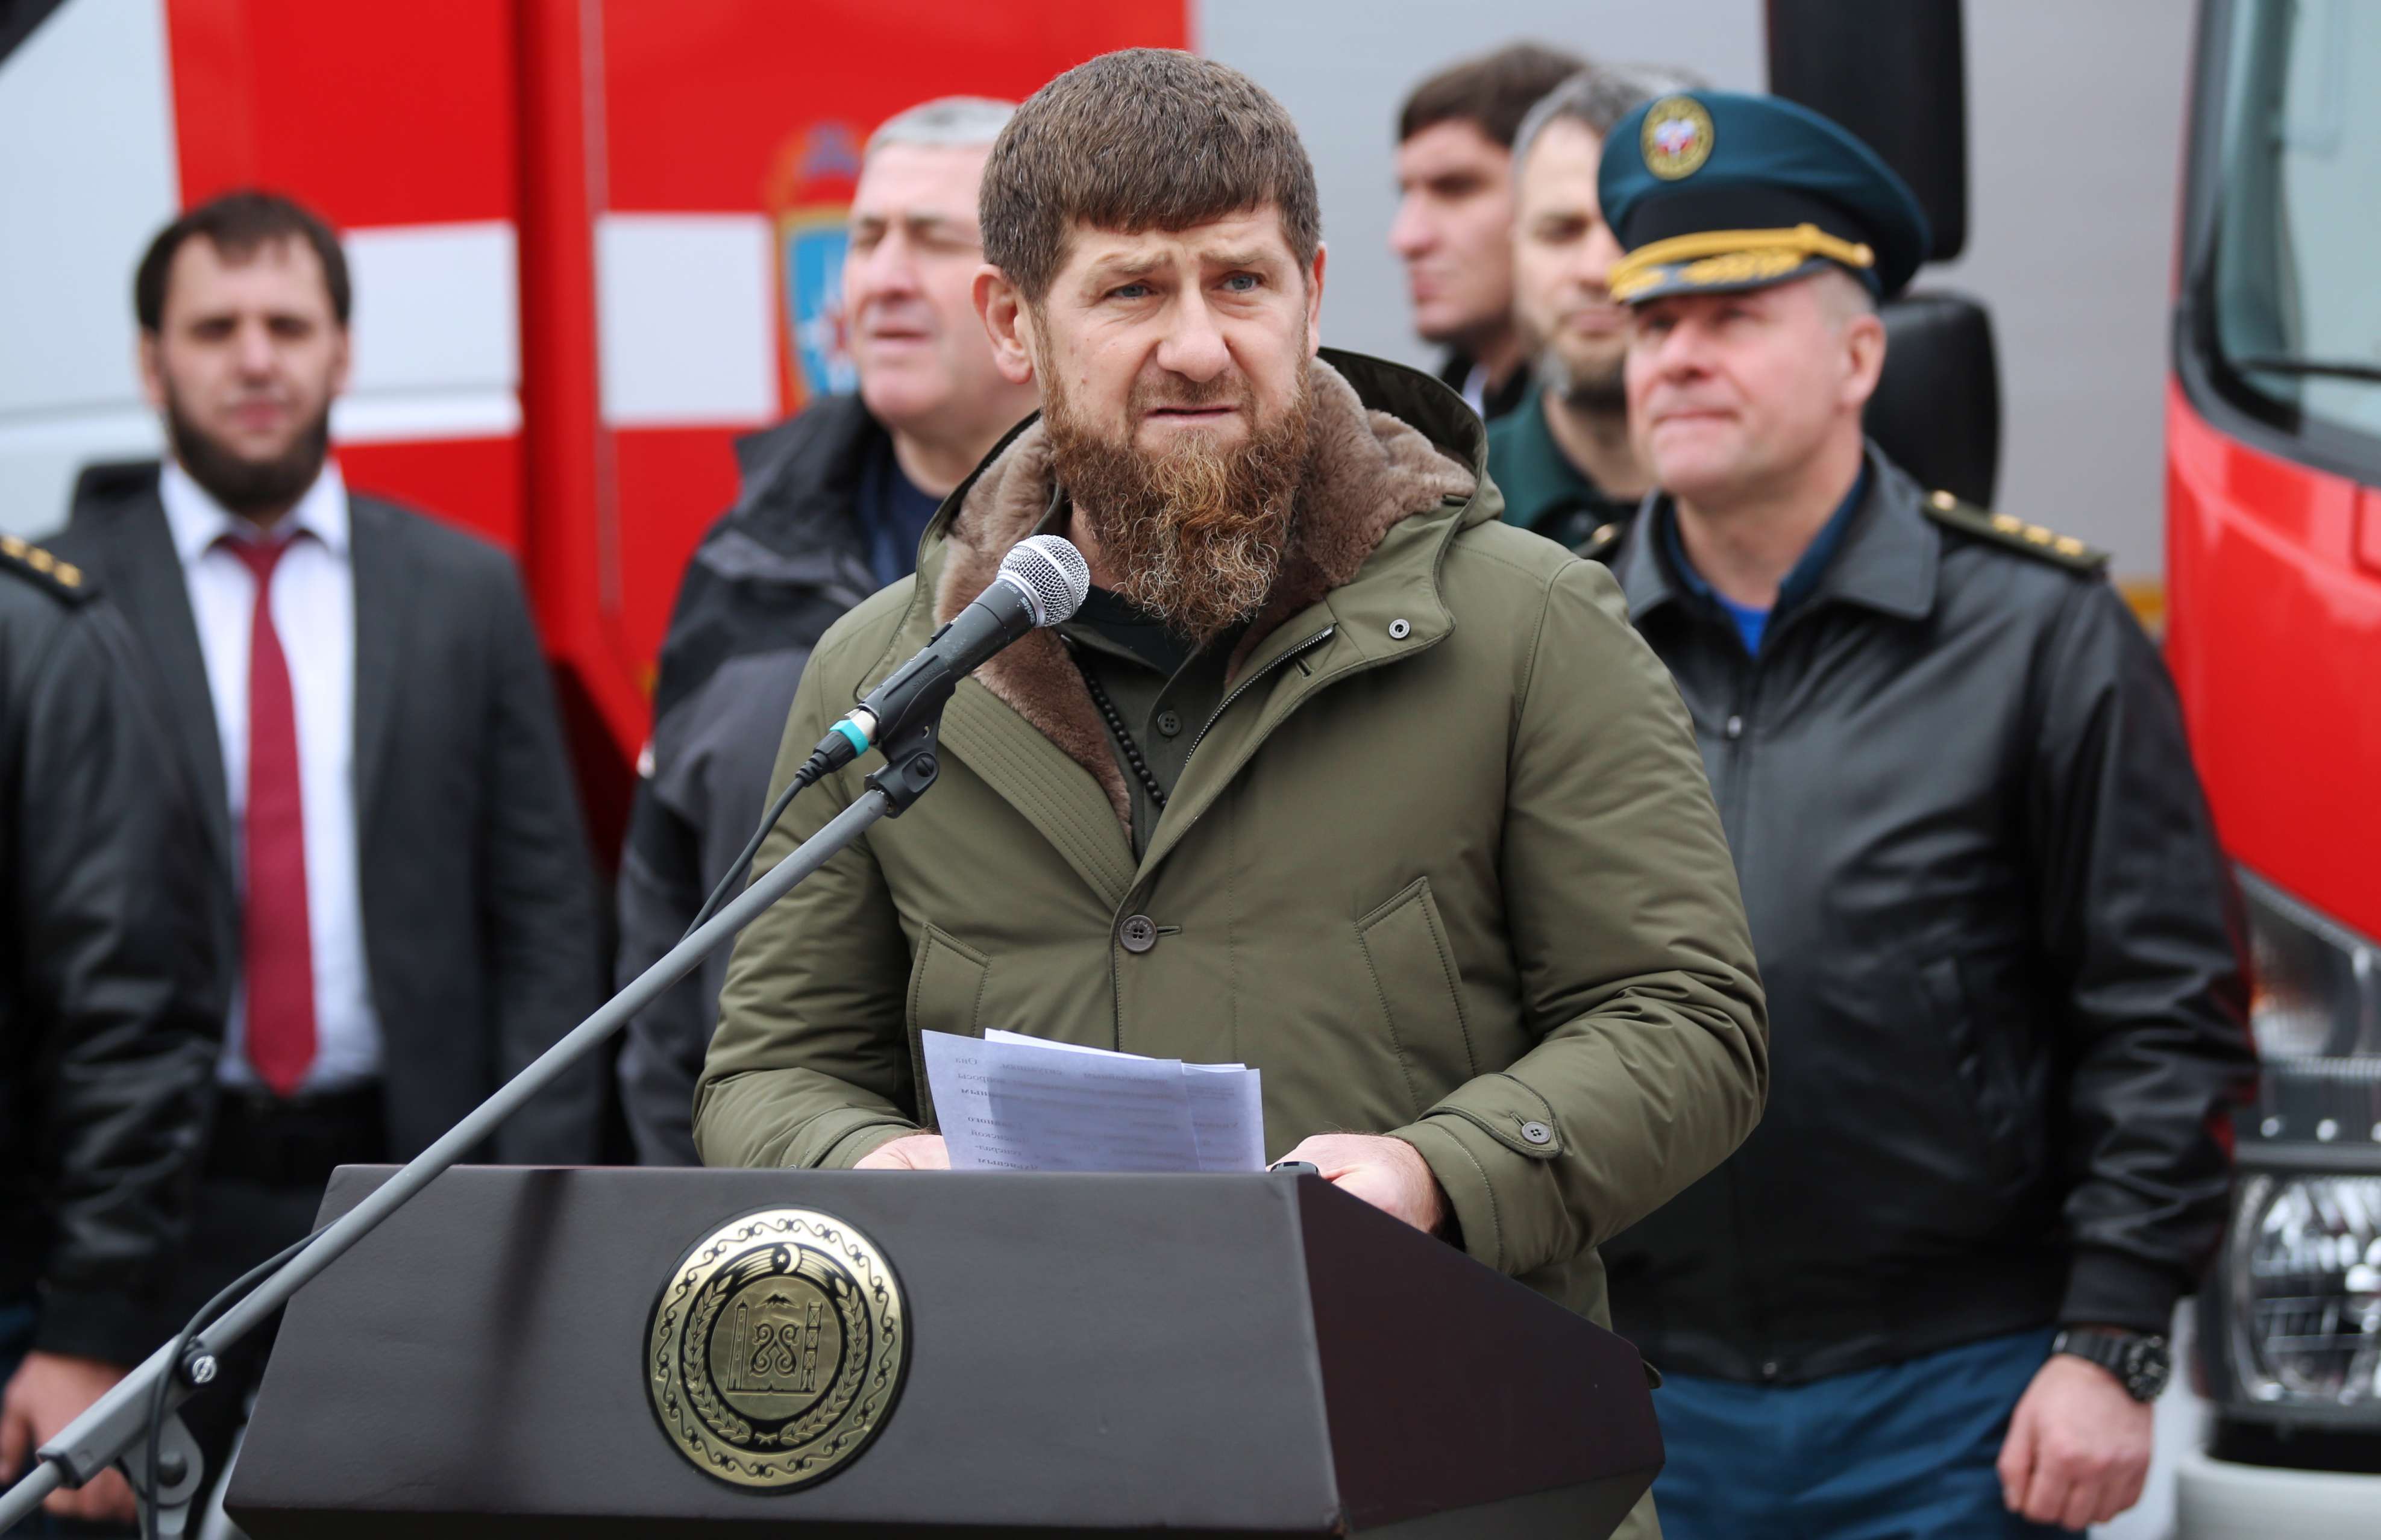 Chechen leaders charged over alleged gay purge, lgbtq torture